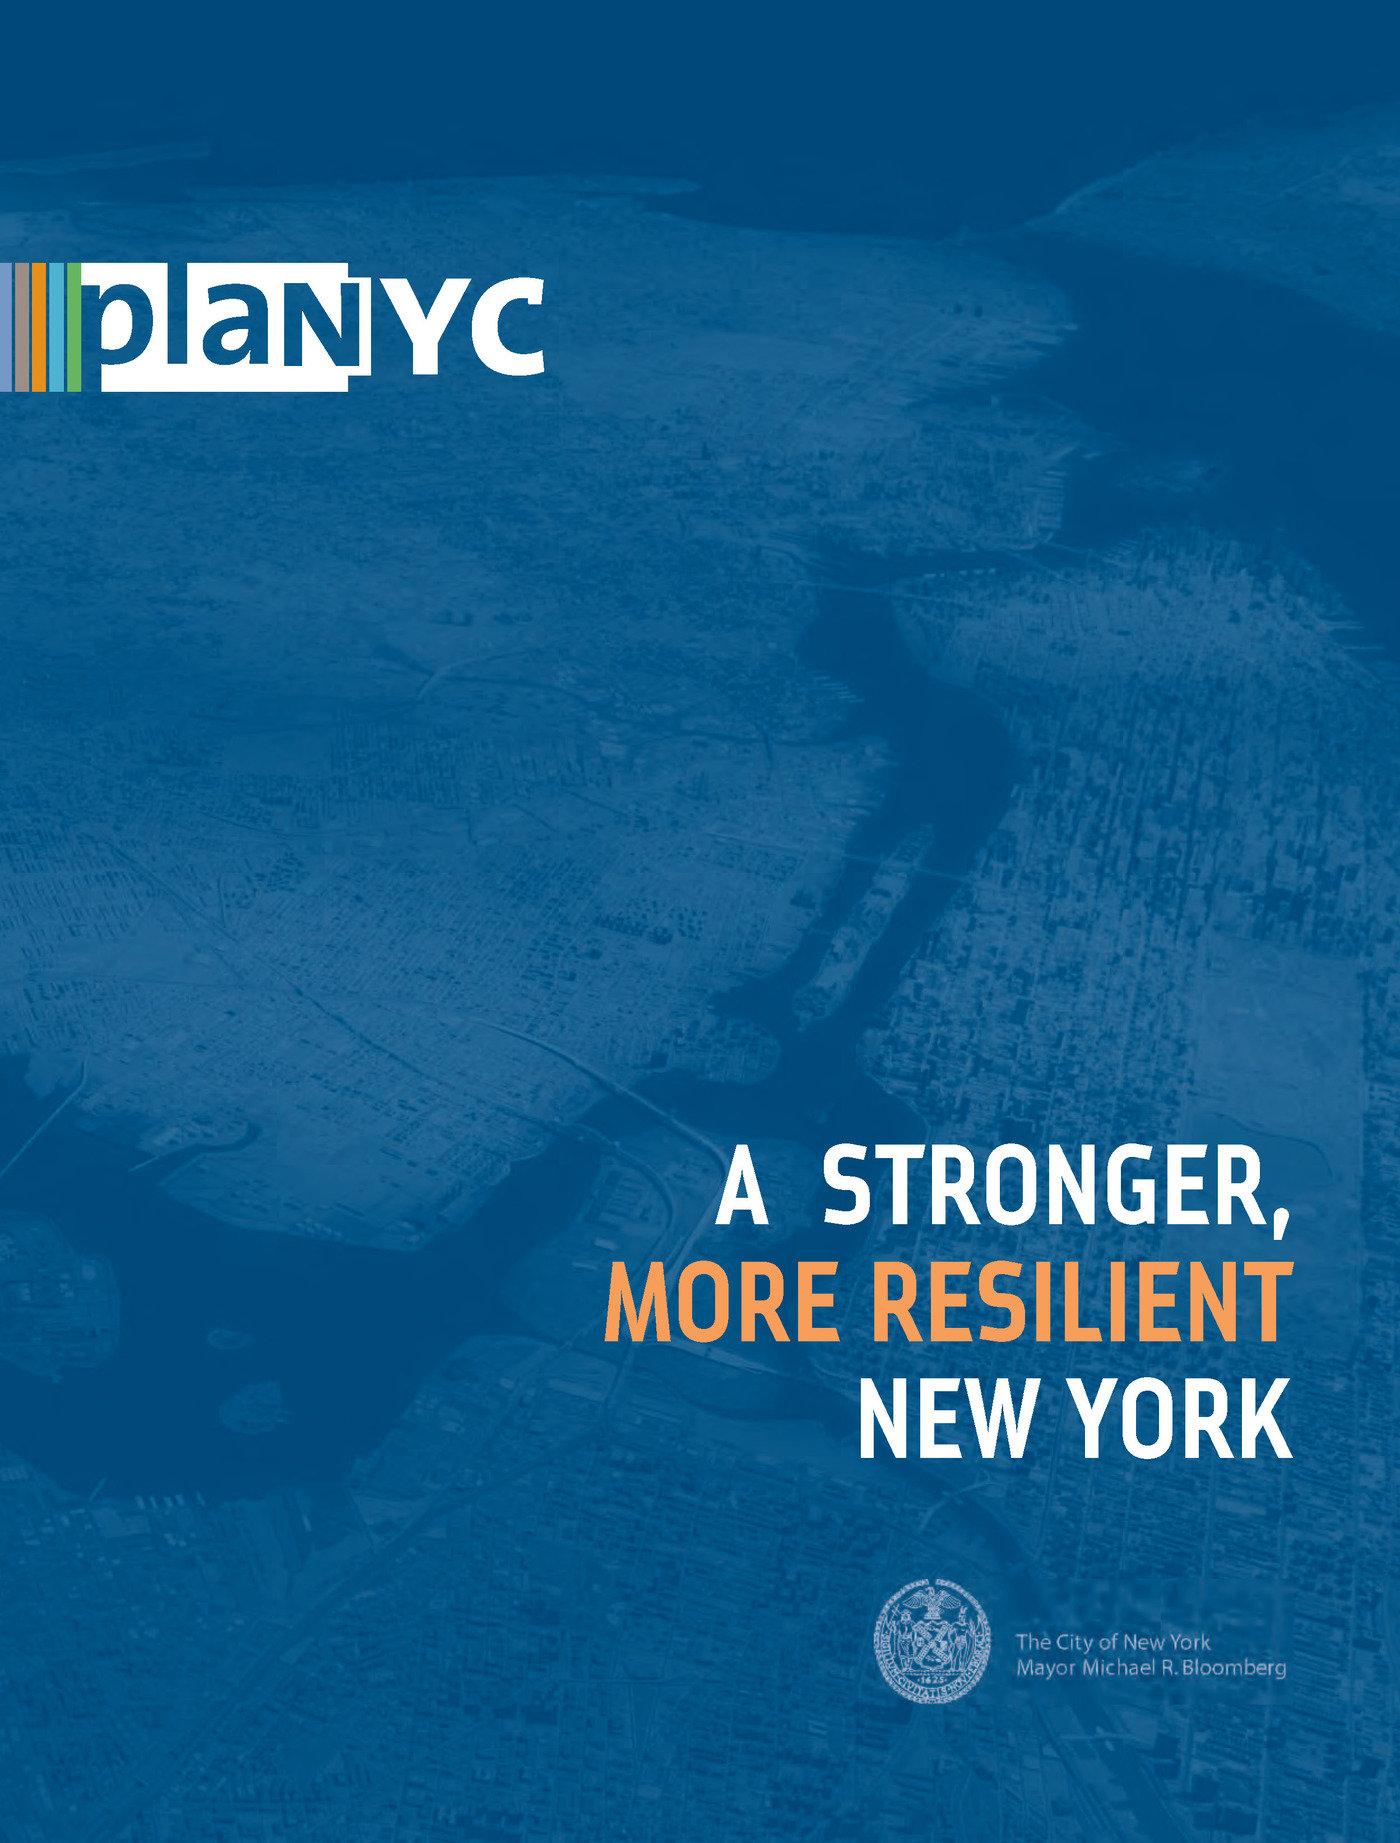 Special Initiative for Rebuilding and Resiliency